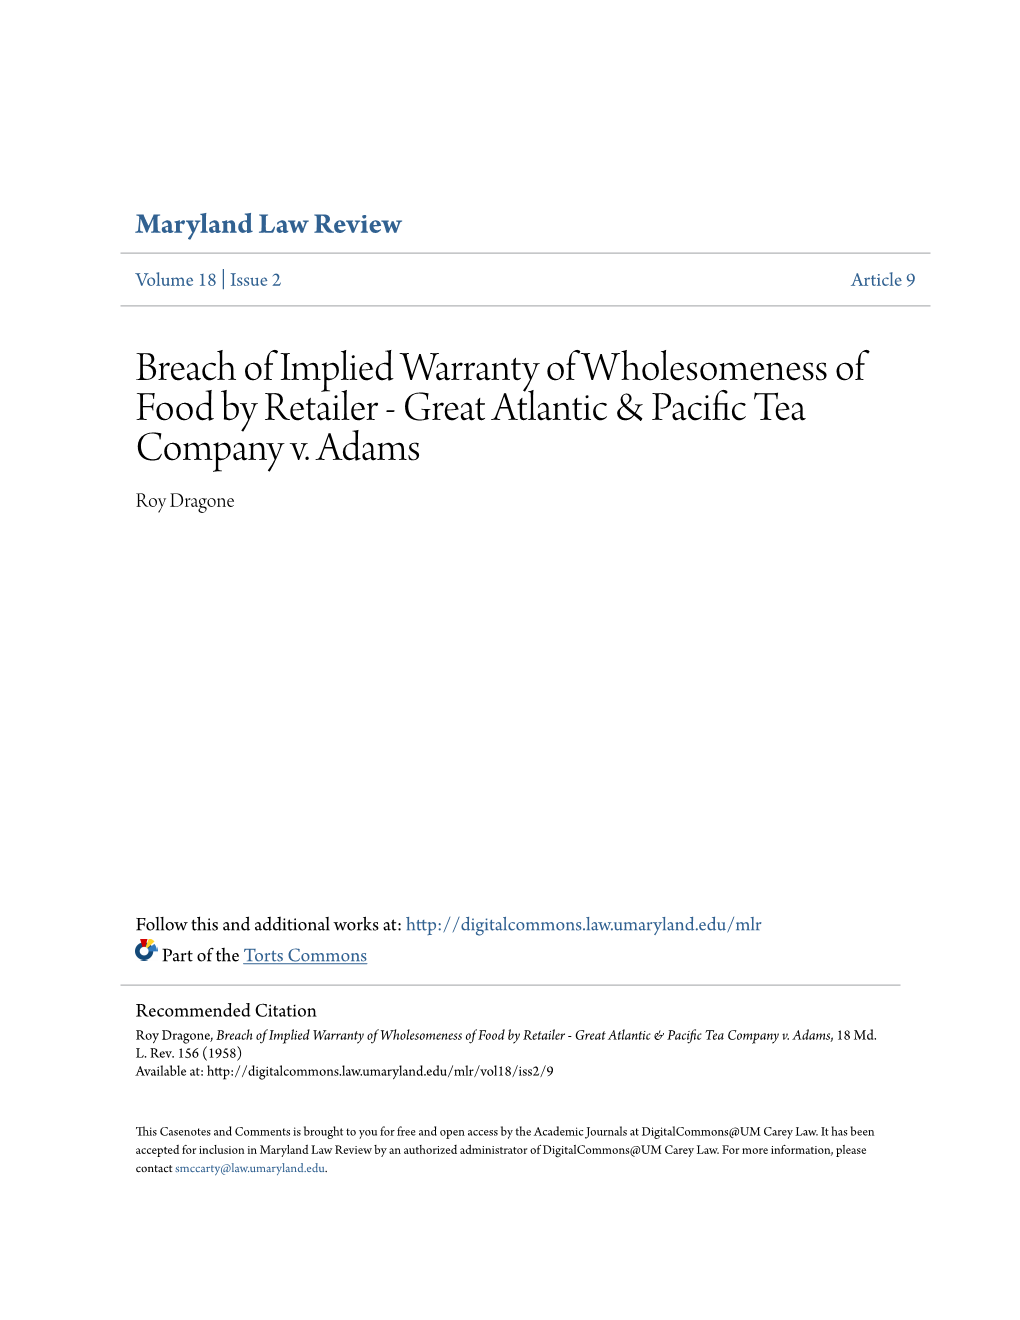 Breach of Implied Warranty of Wholesomeness of Food by Retailer - Great Atlantic & Pacific Et a Company V